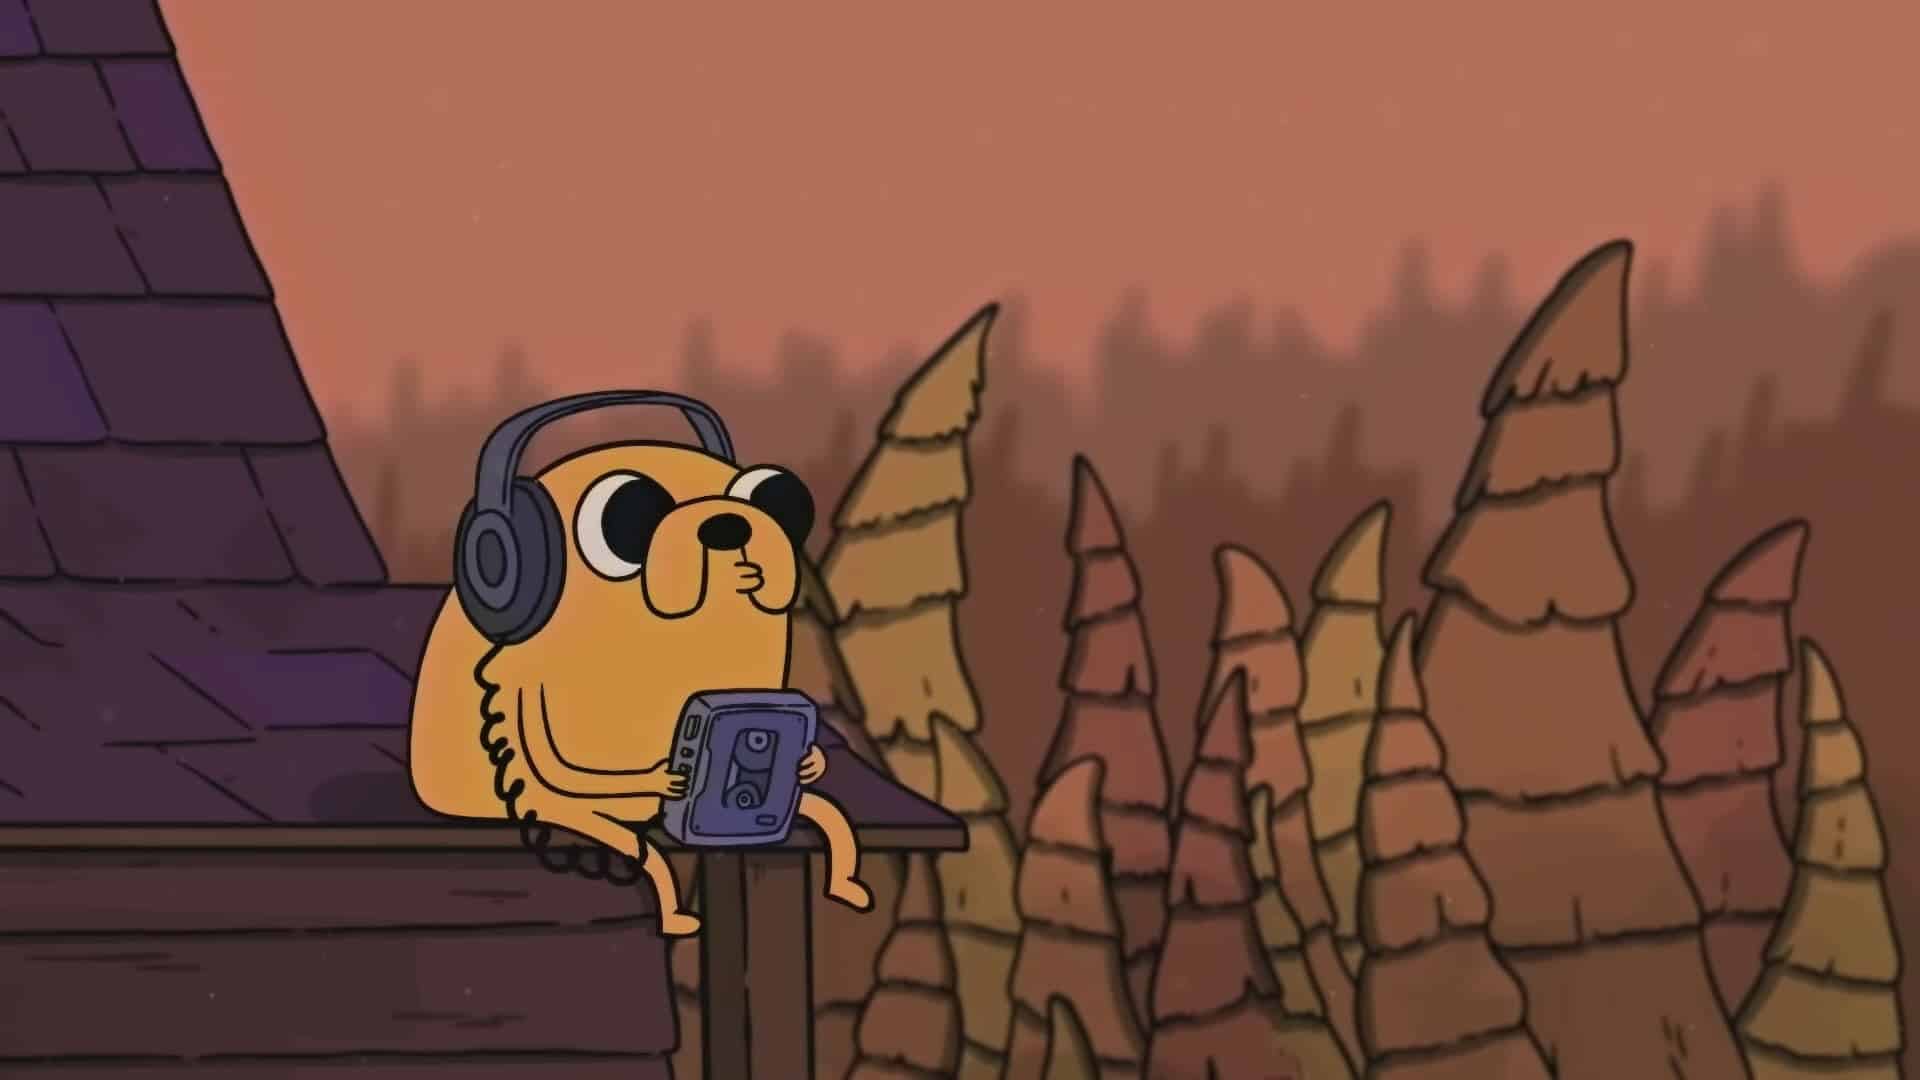 Jake The Dog listening to music on rooftop